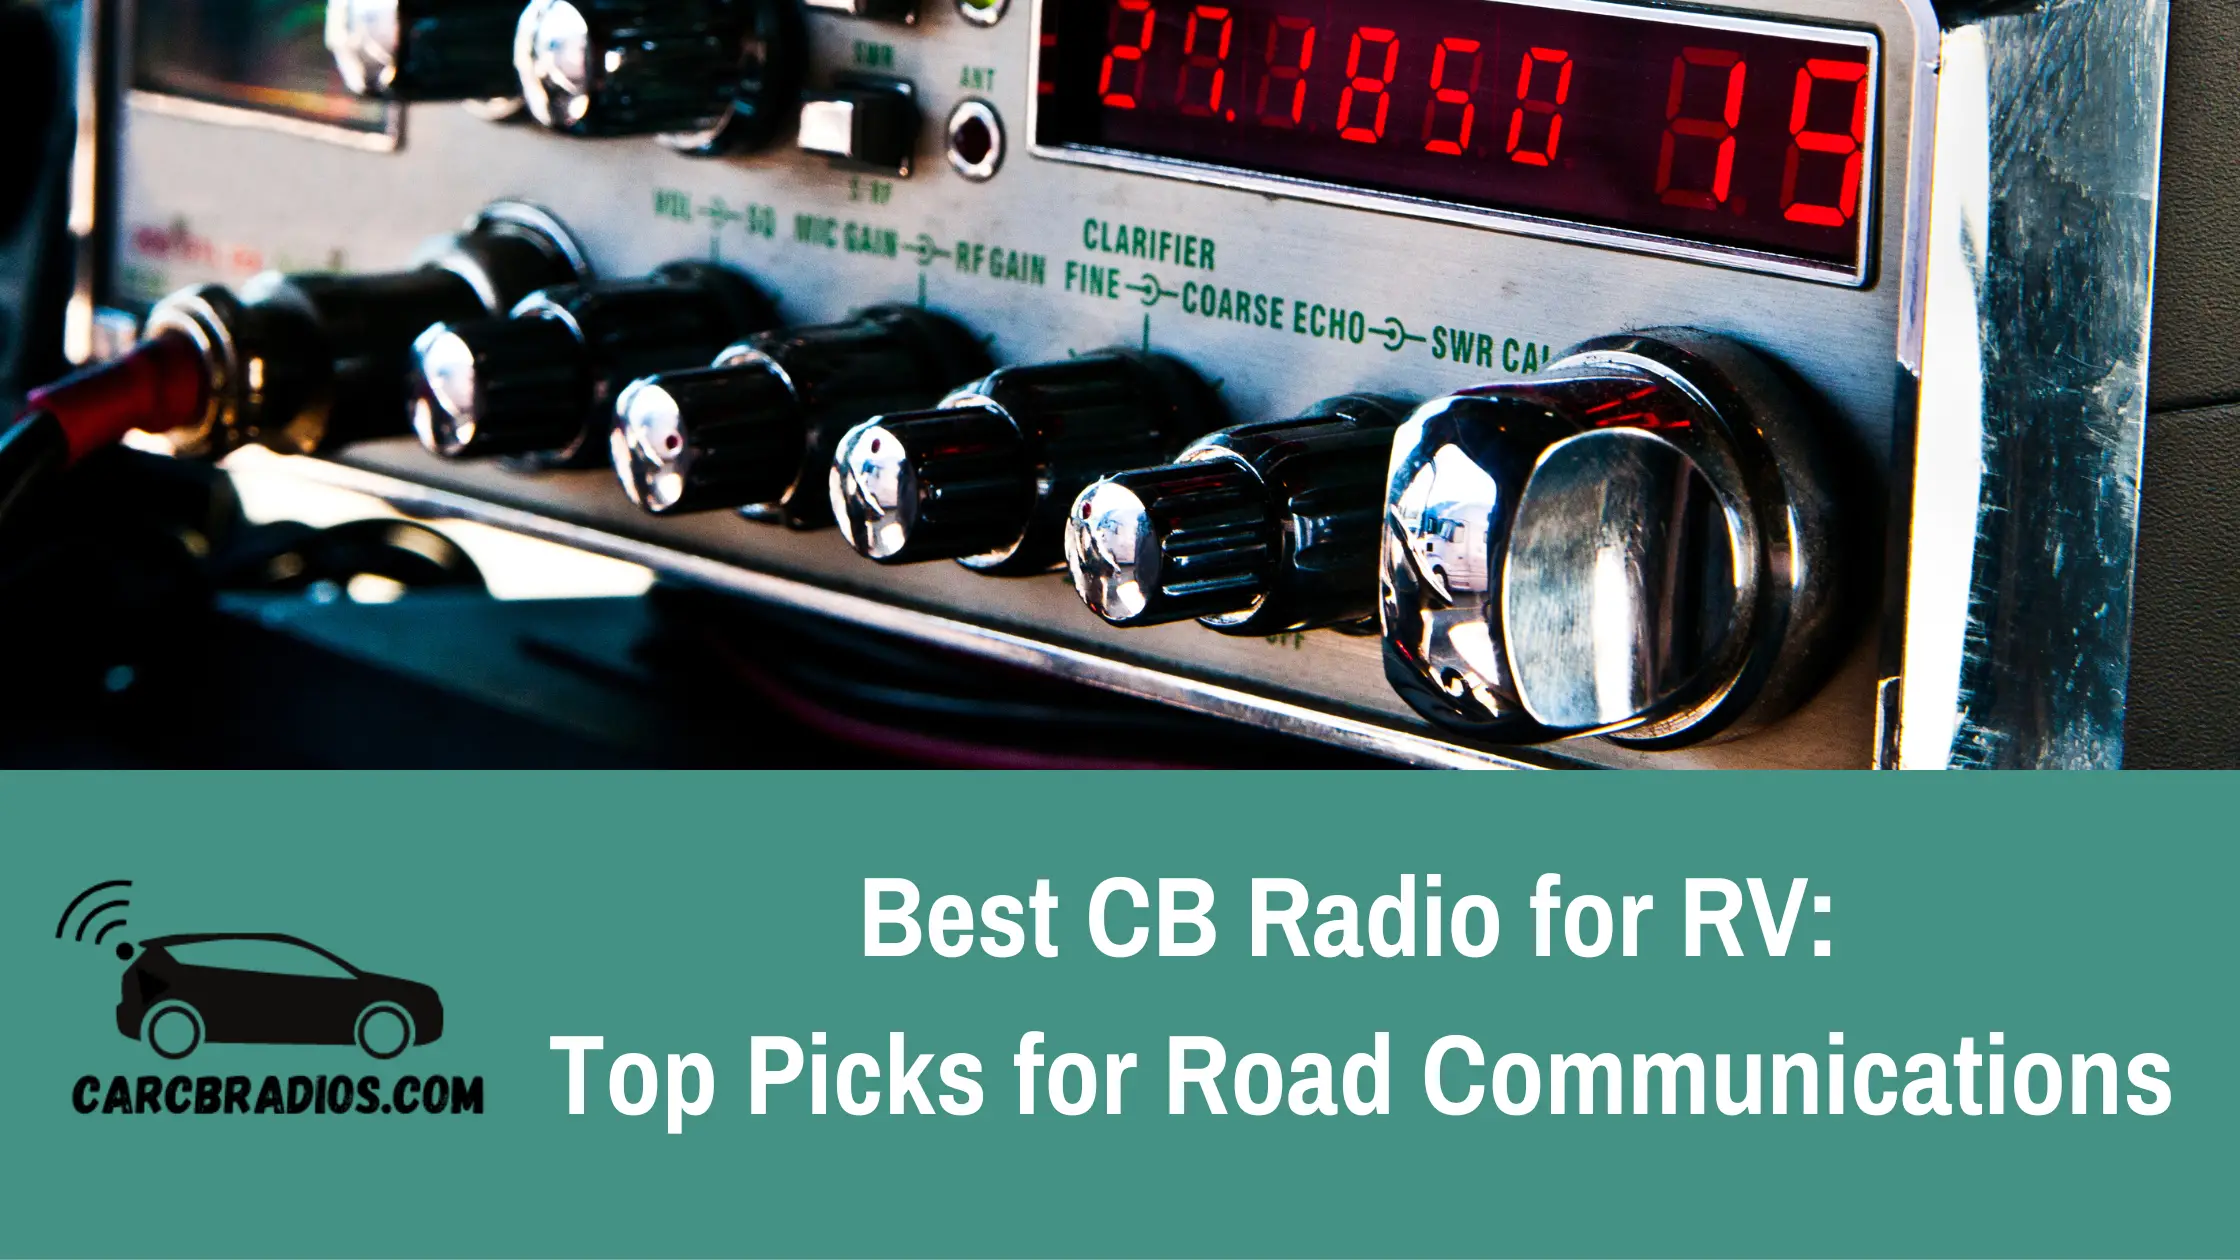 When it comes to choosing the best CB radio for an RV, there are a few critical factors to consider. One of the most important is the radio's range. Since RVers typically travel long distances, it's essential to choose a CB radio with a range that matches your needs. Additionally, you'll want to consider the radio's power output, antenna type, and ease of installation.